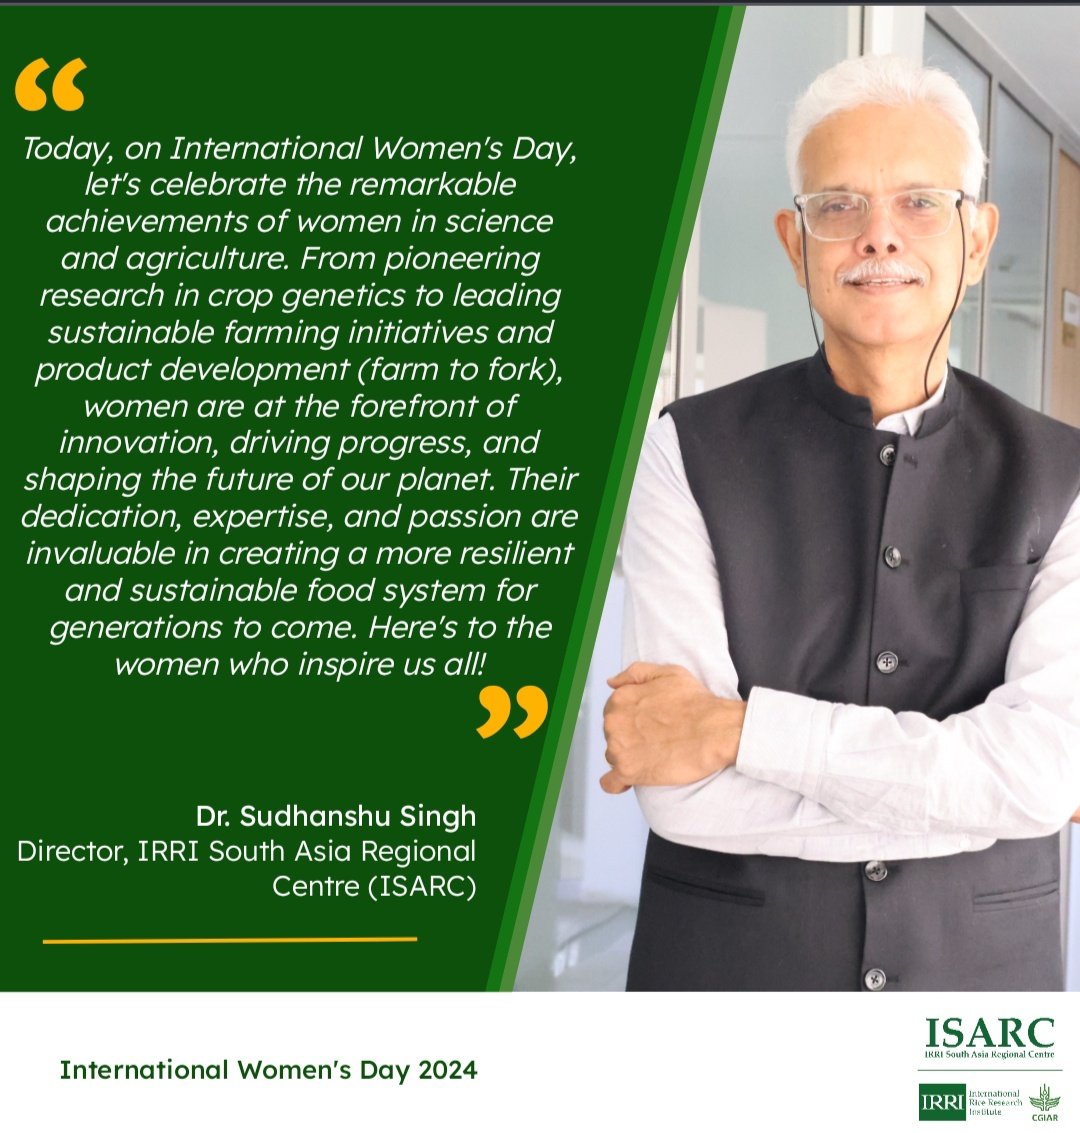 #investinwomen
On the occasion of #IWD2024, ISARC Director Dr. Sudhanshu Singh shares his views on the contribution of women in Science and Agriculture and creating more resilient and sustainable food systems for generations to come. 
#withsciencewecan #WomenAndGirlsInScience